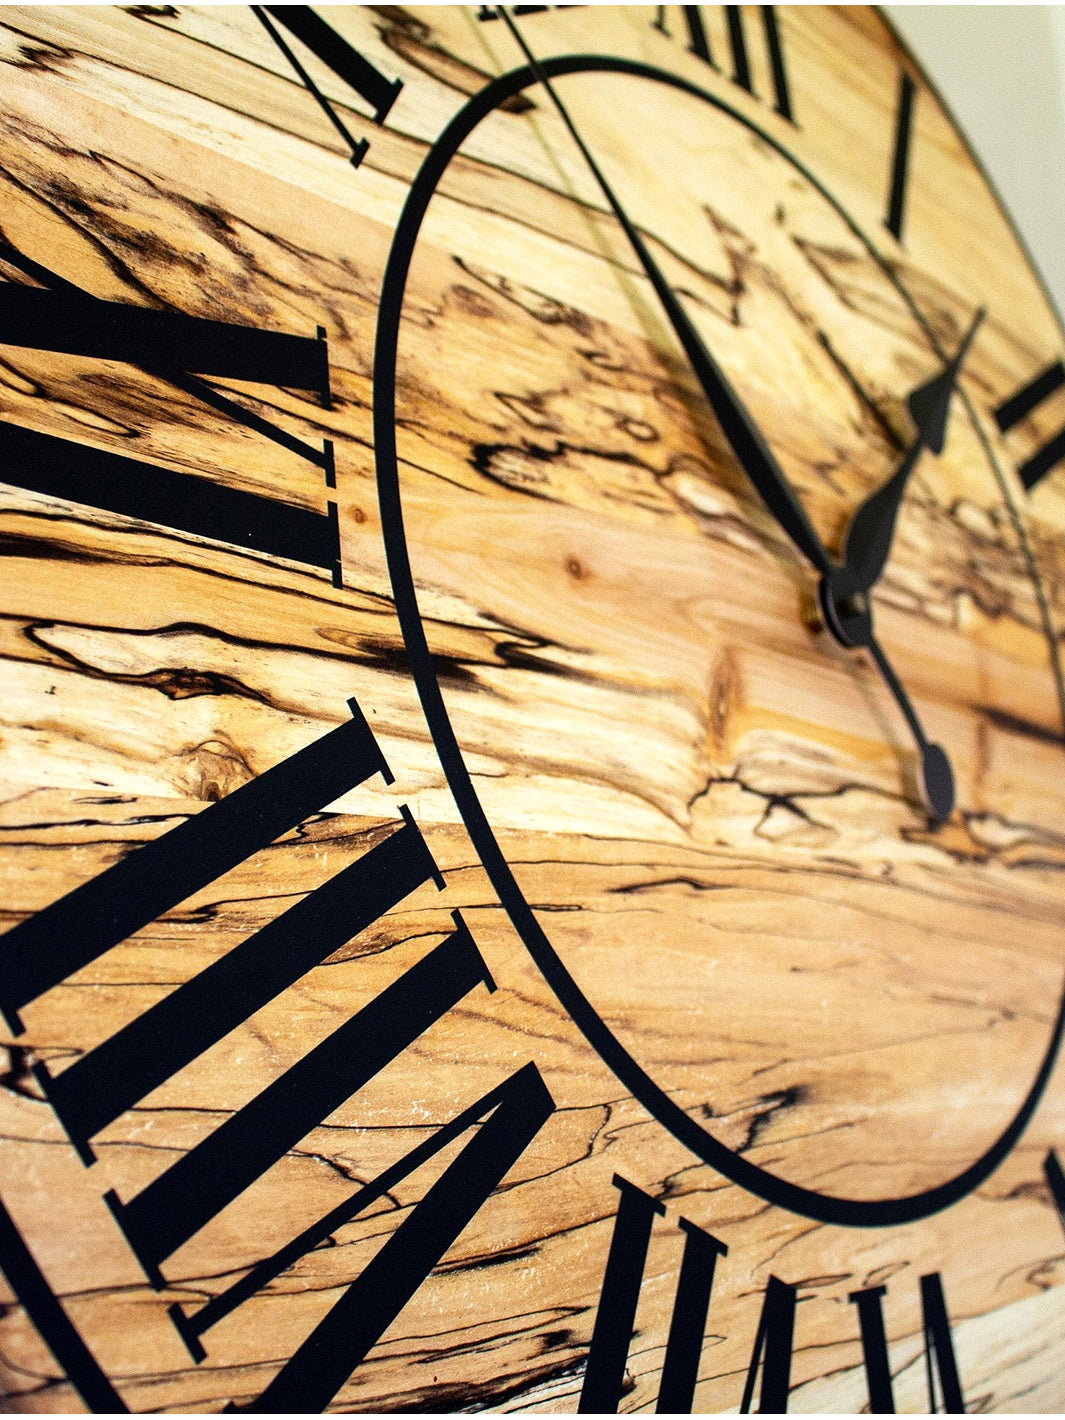 Solid Spalted Maple Wall Clock with Black Lines and Roman Numerals Earthly Comfort Clocks 547-3